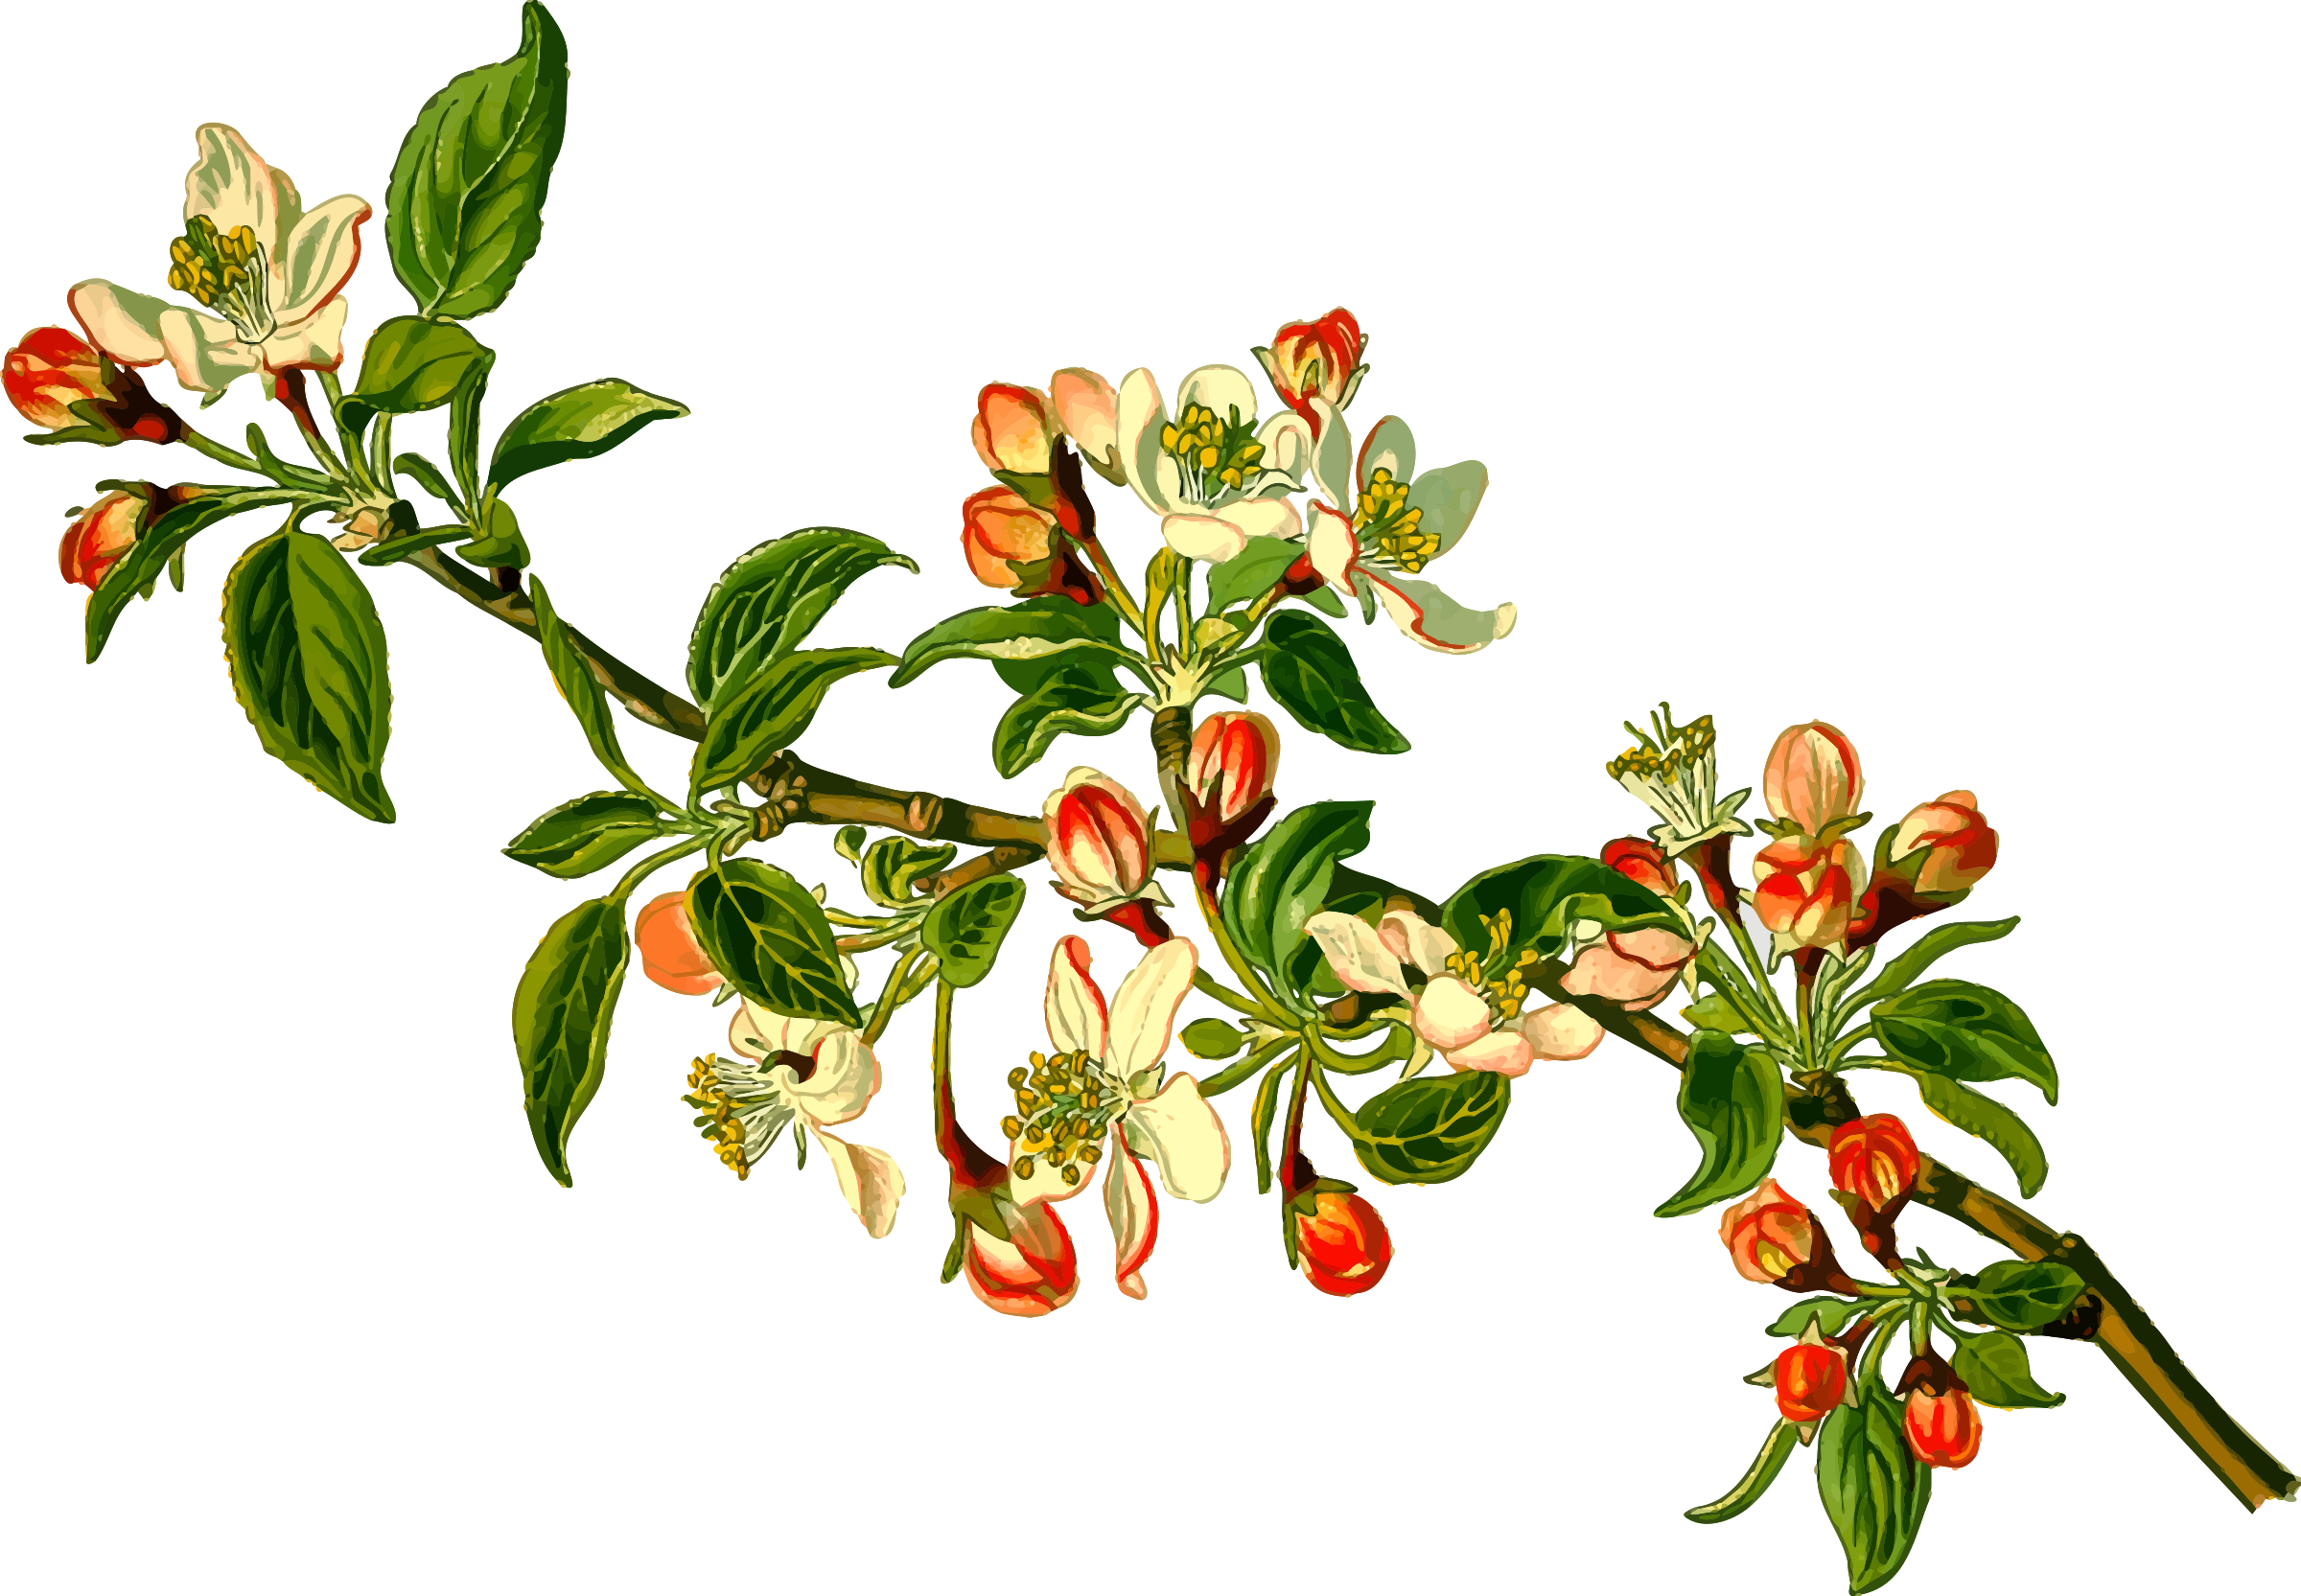 A Branch With Flowers And Leaves